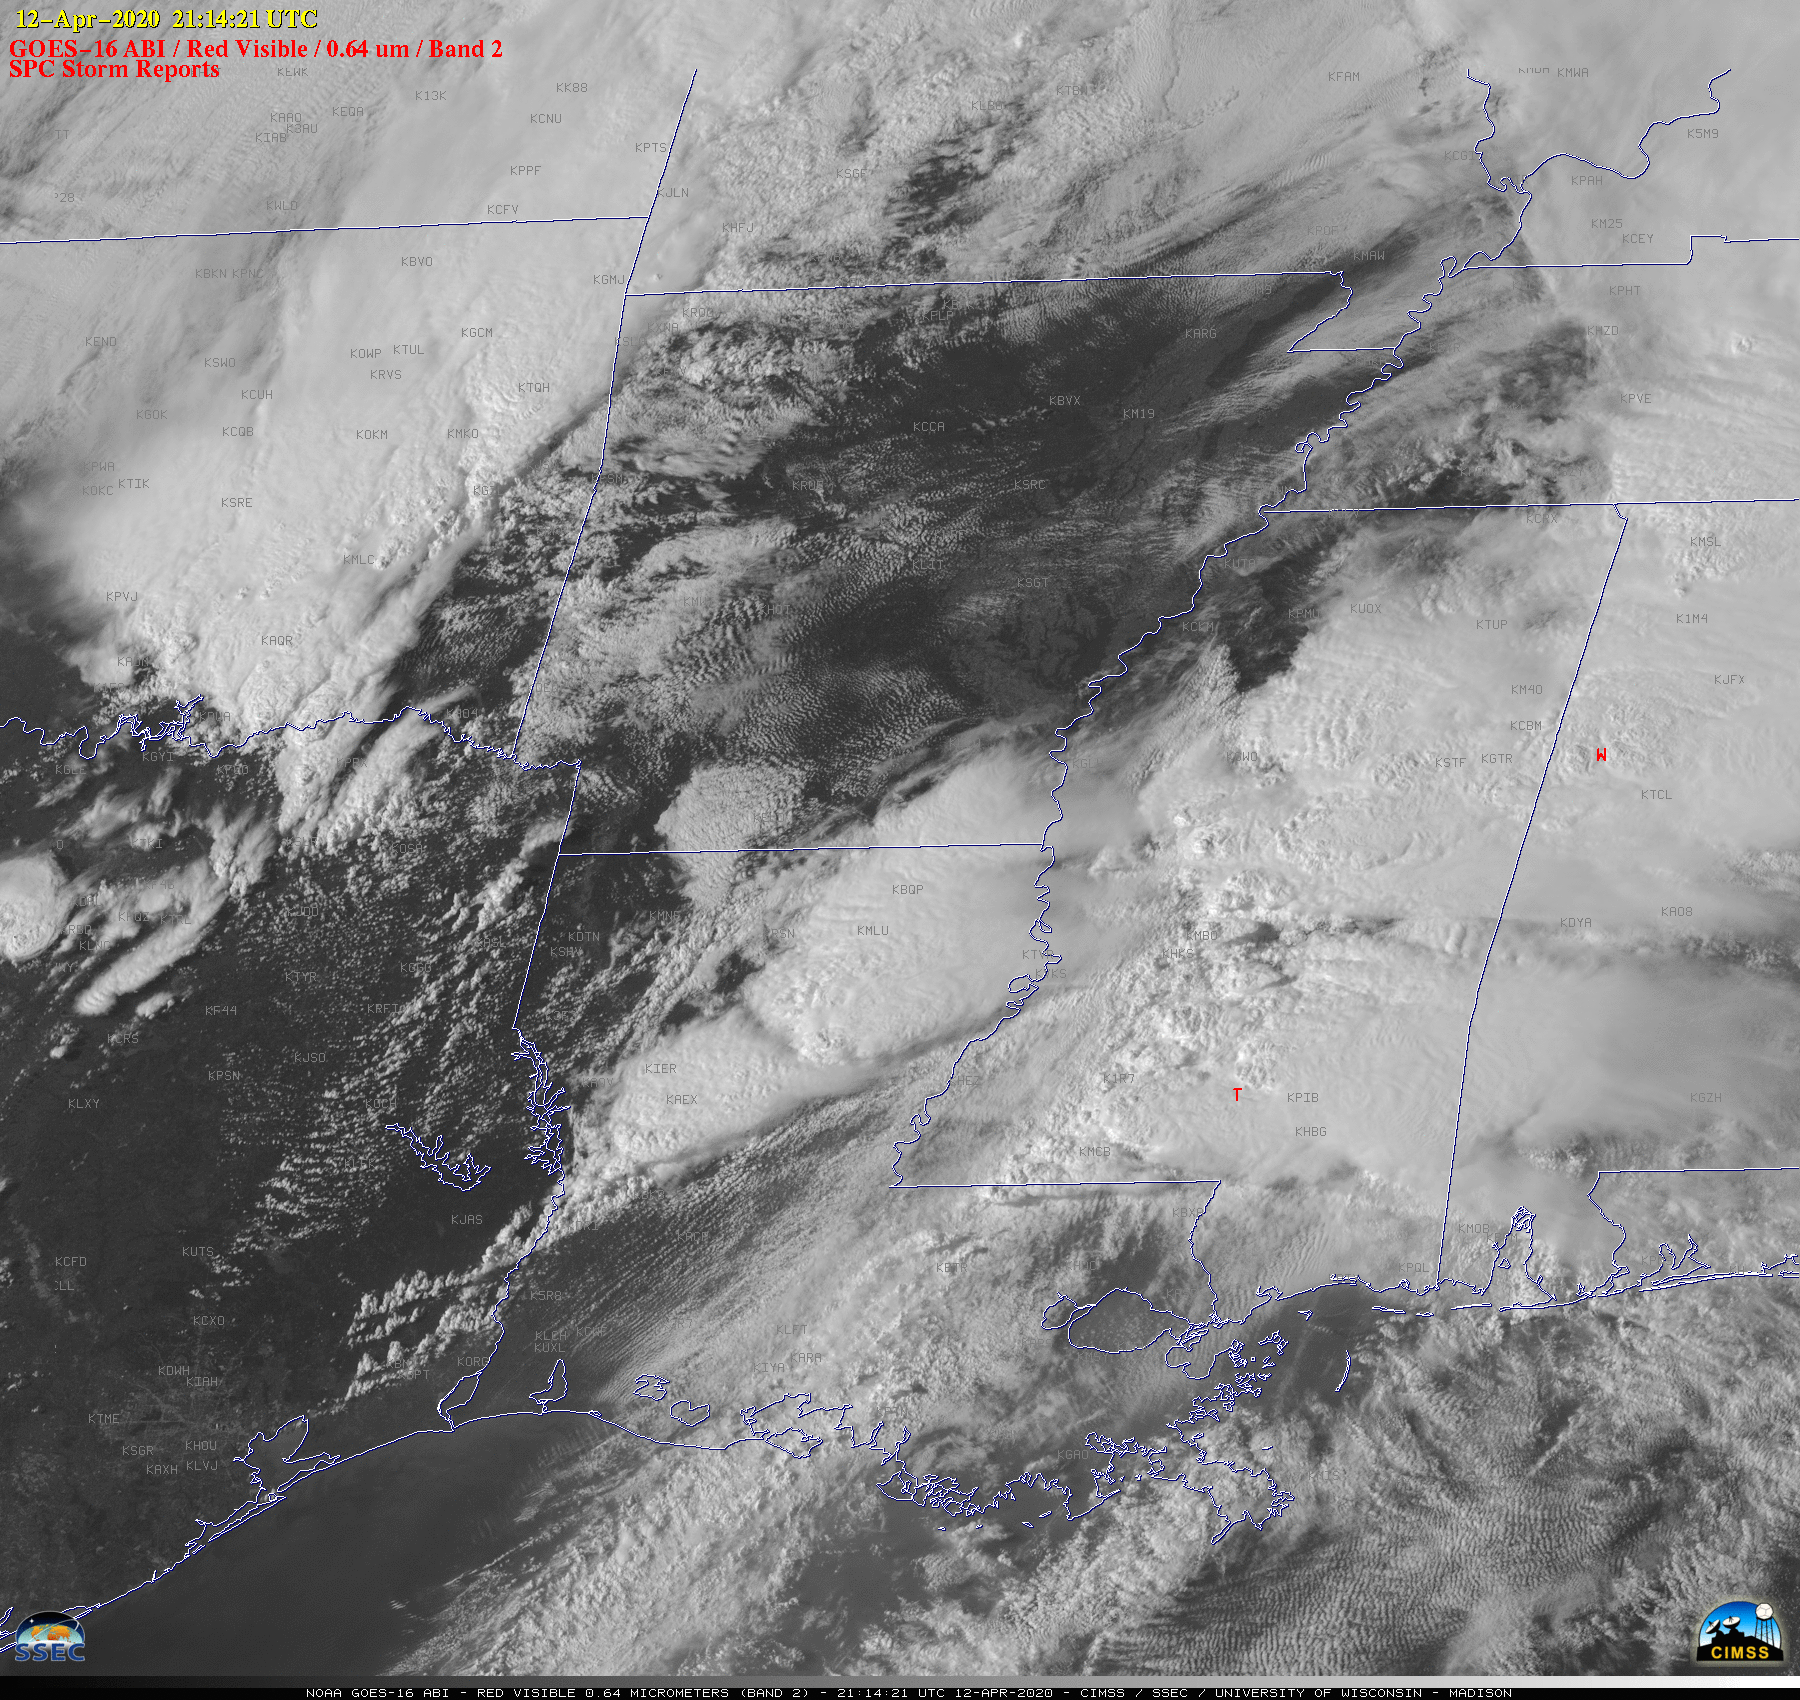 GOES-16 "Red" Visible (0.64 µm) images, with time-matched SPC Storm Reports plotted in red [click to play animation | MP4]